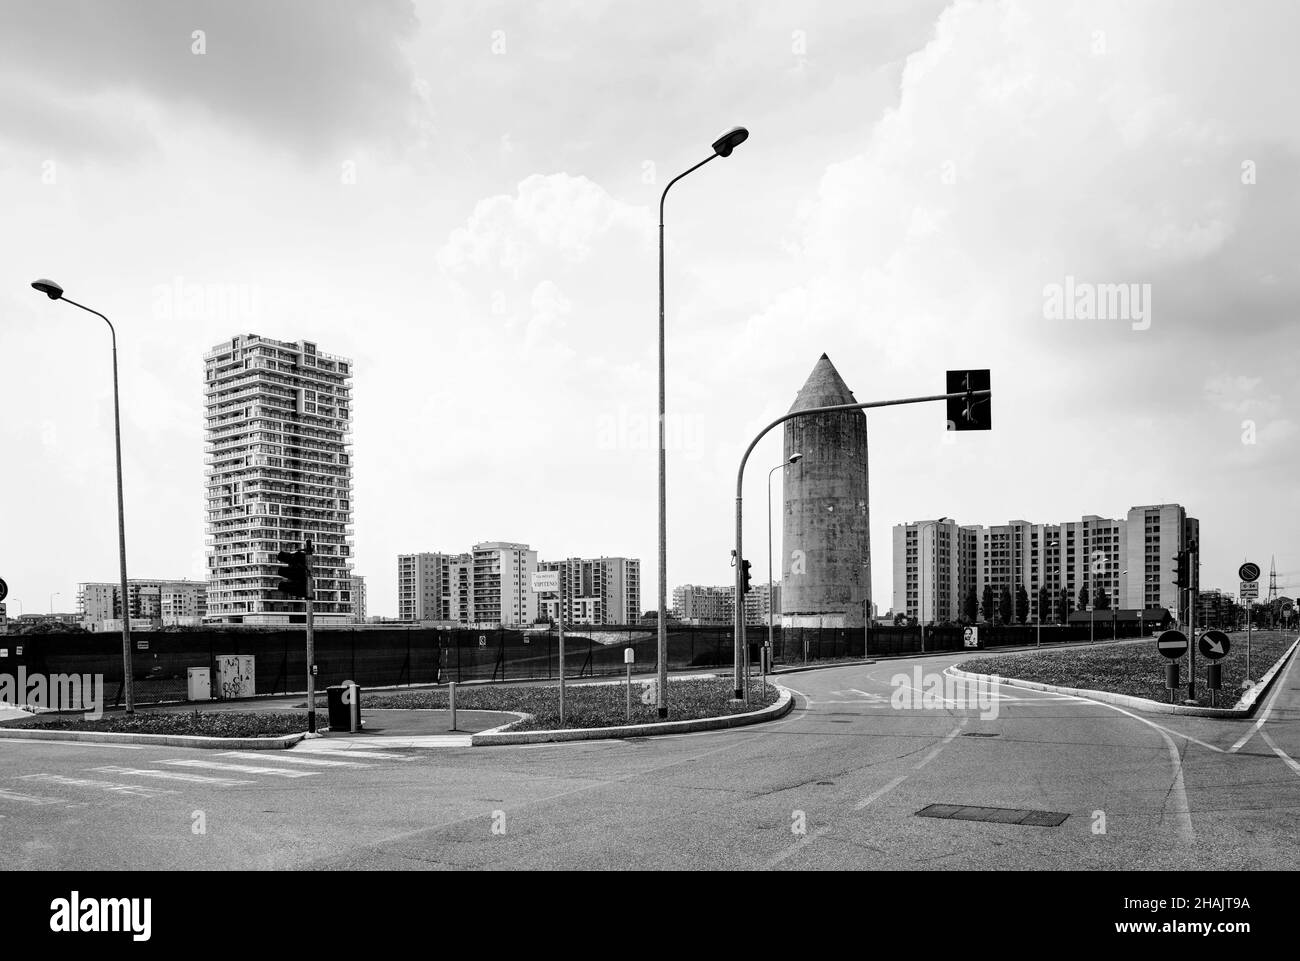 Milan. Italy. Urbanscape with war bunker air-raid shelter Stock Photo